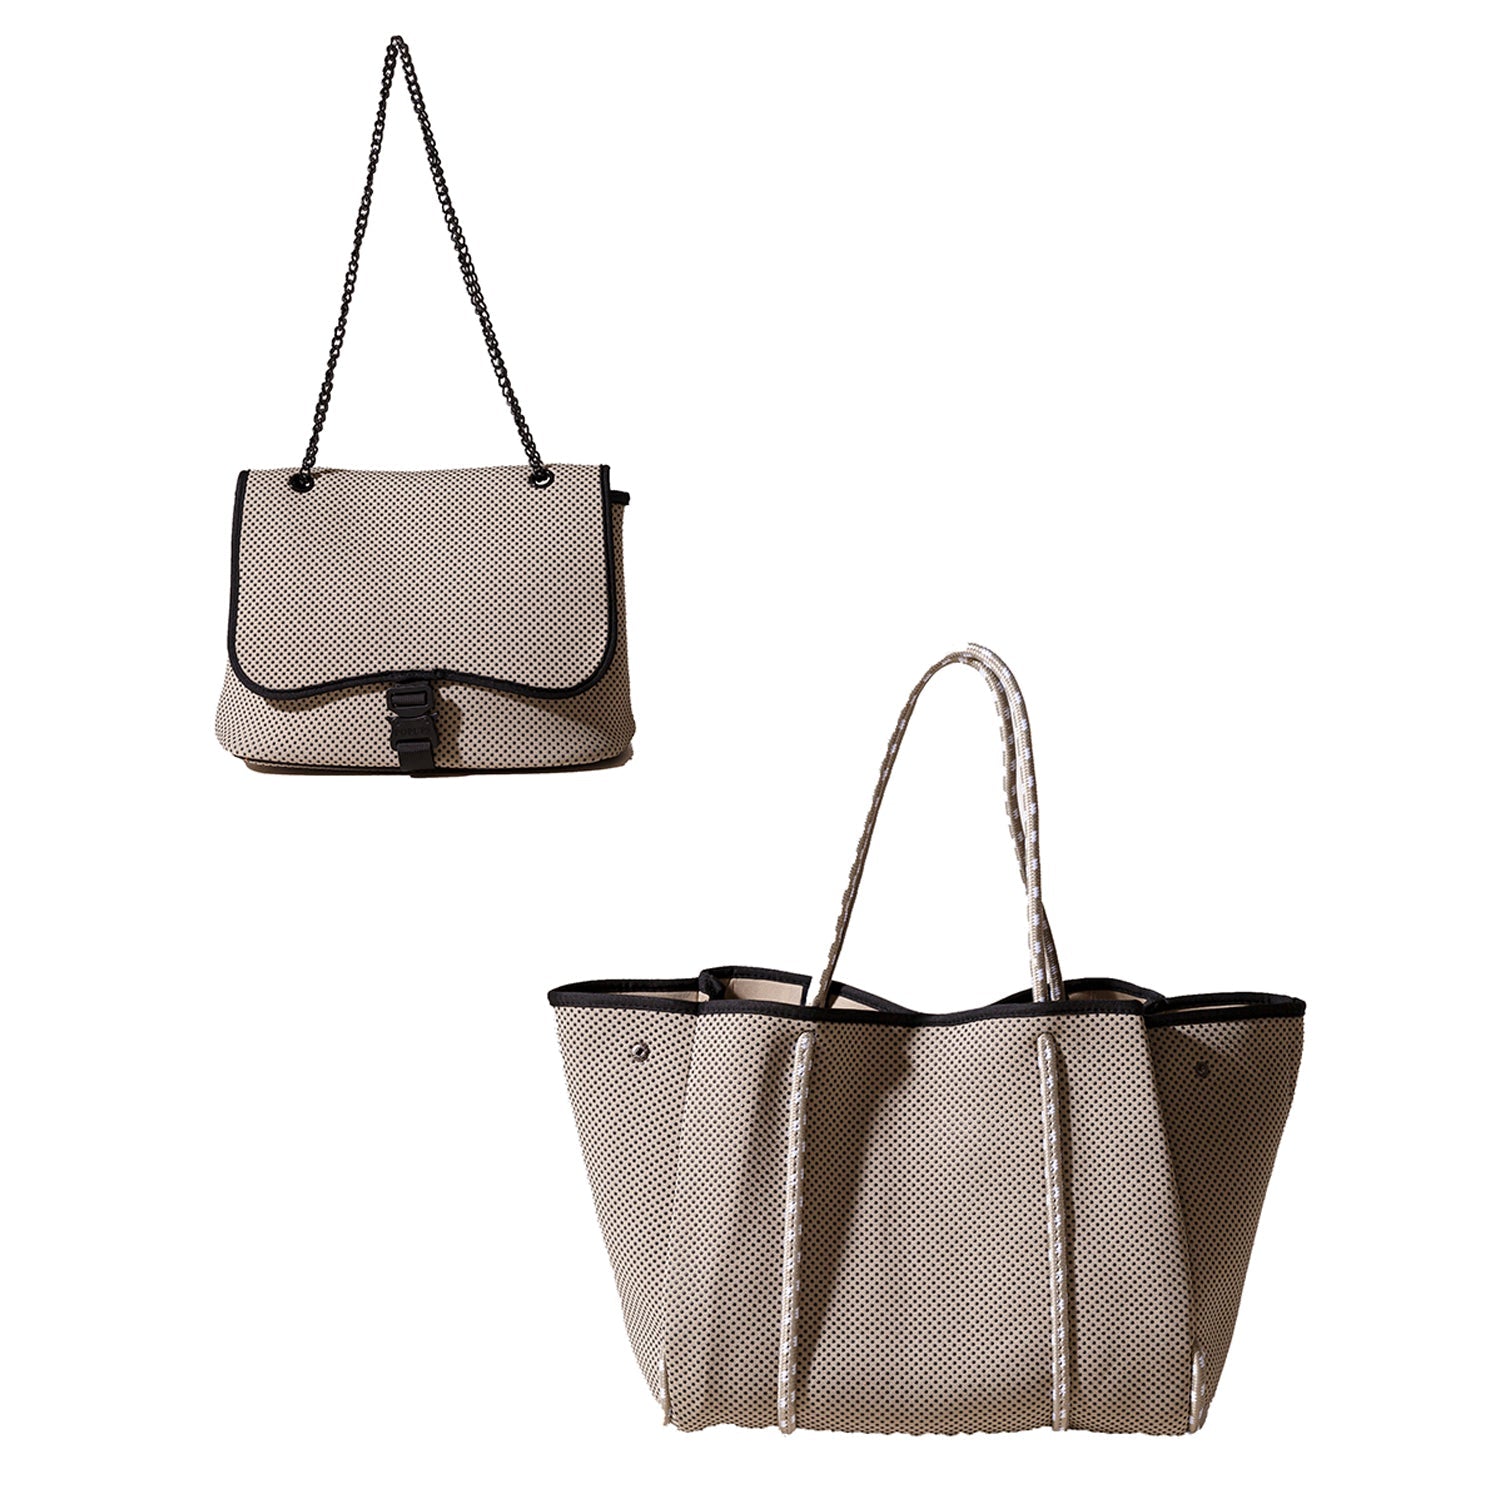 Sydney Tote Bag - Taupe